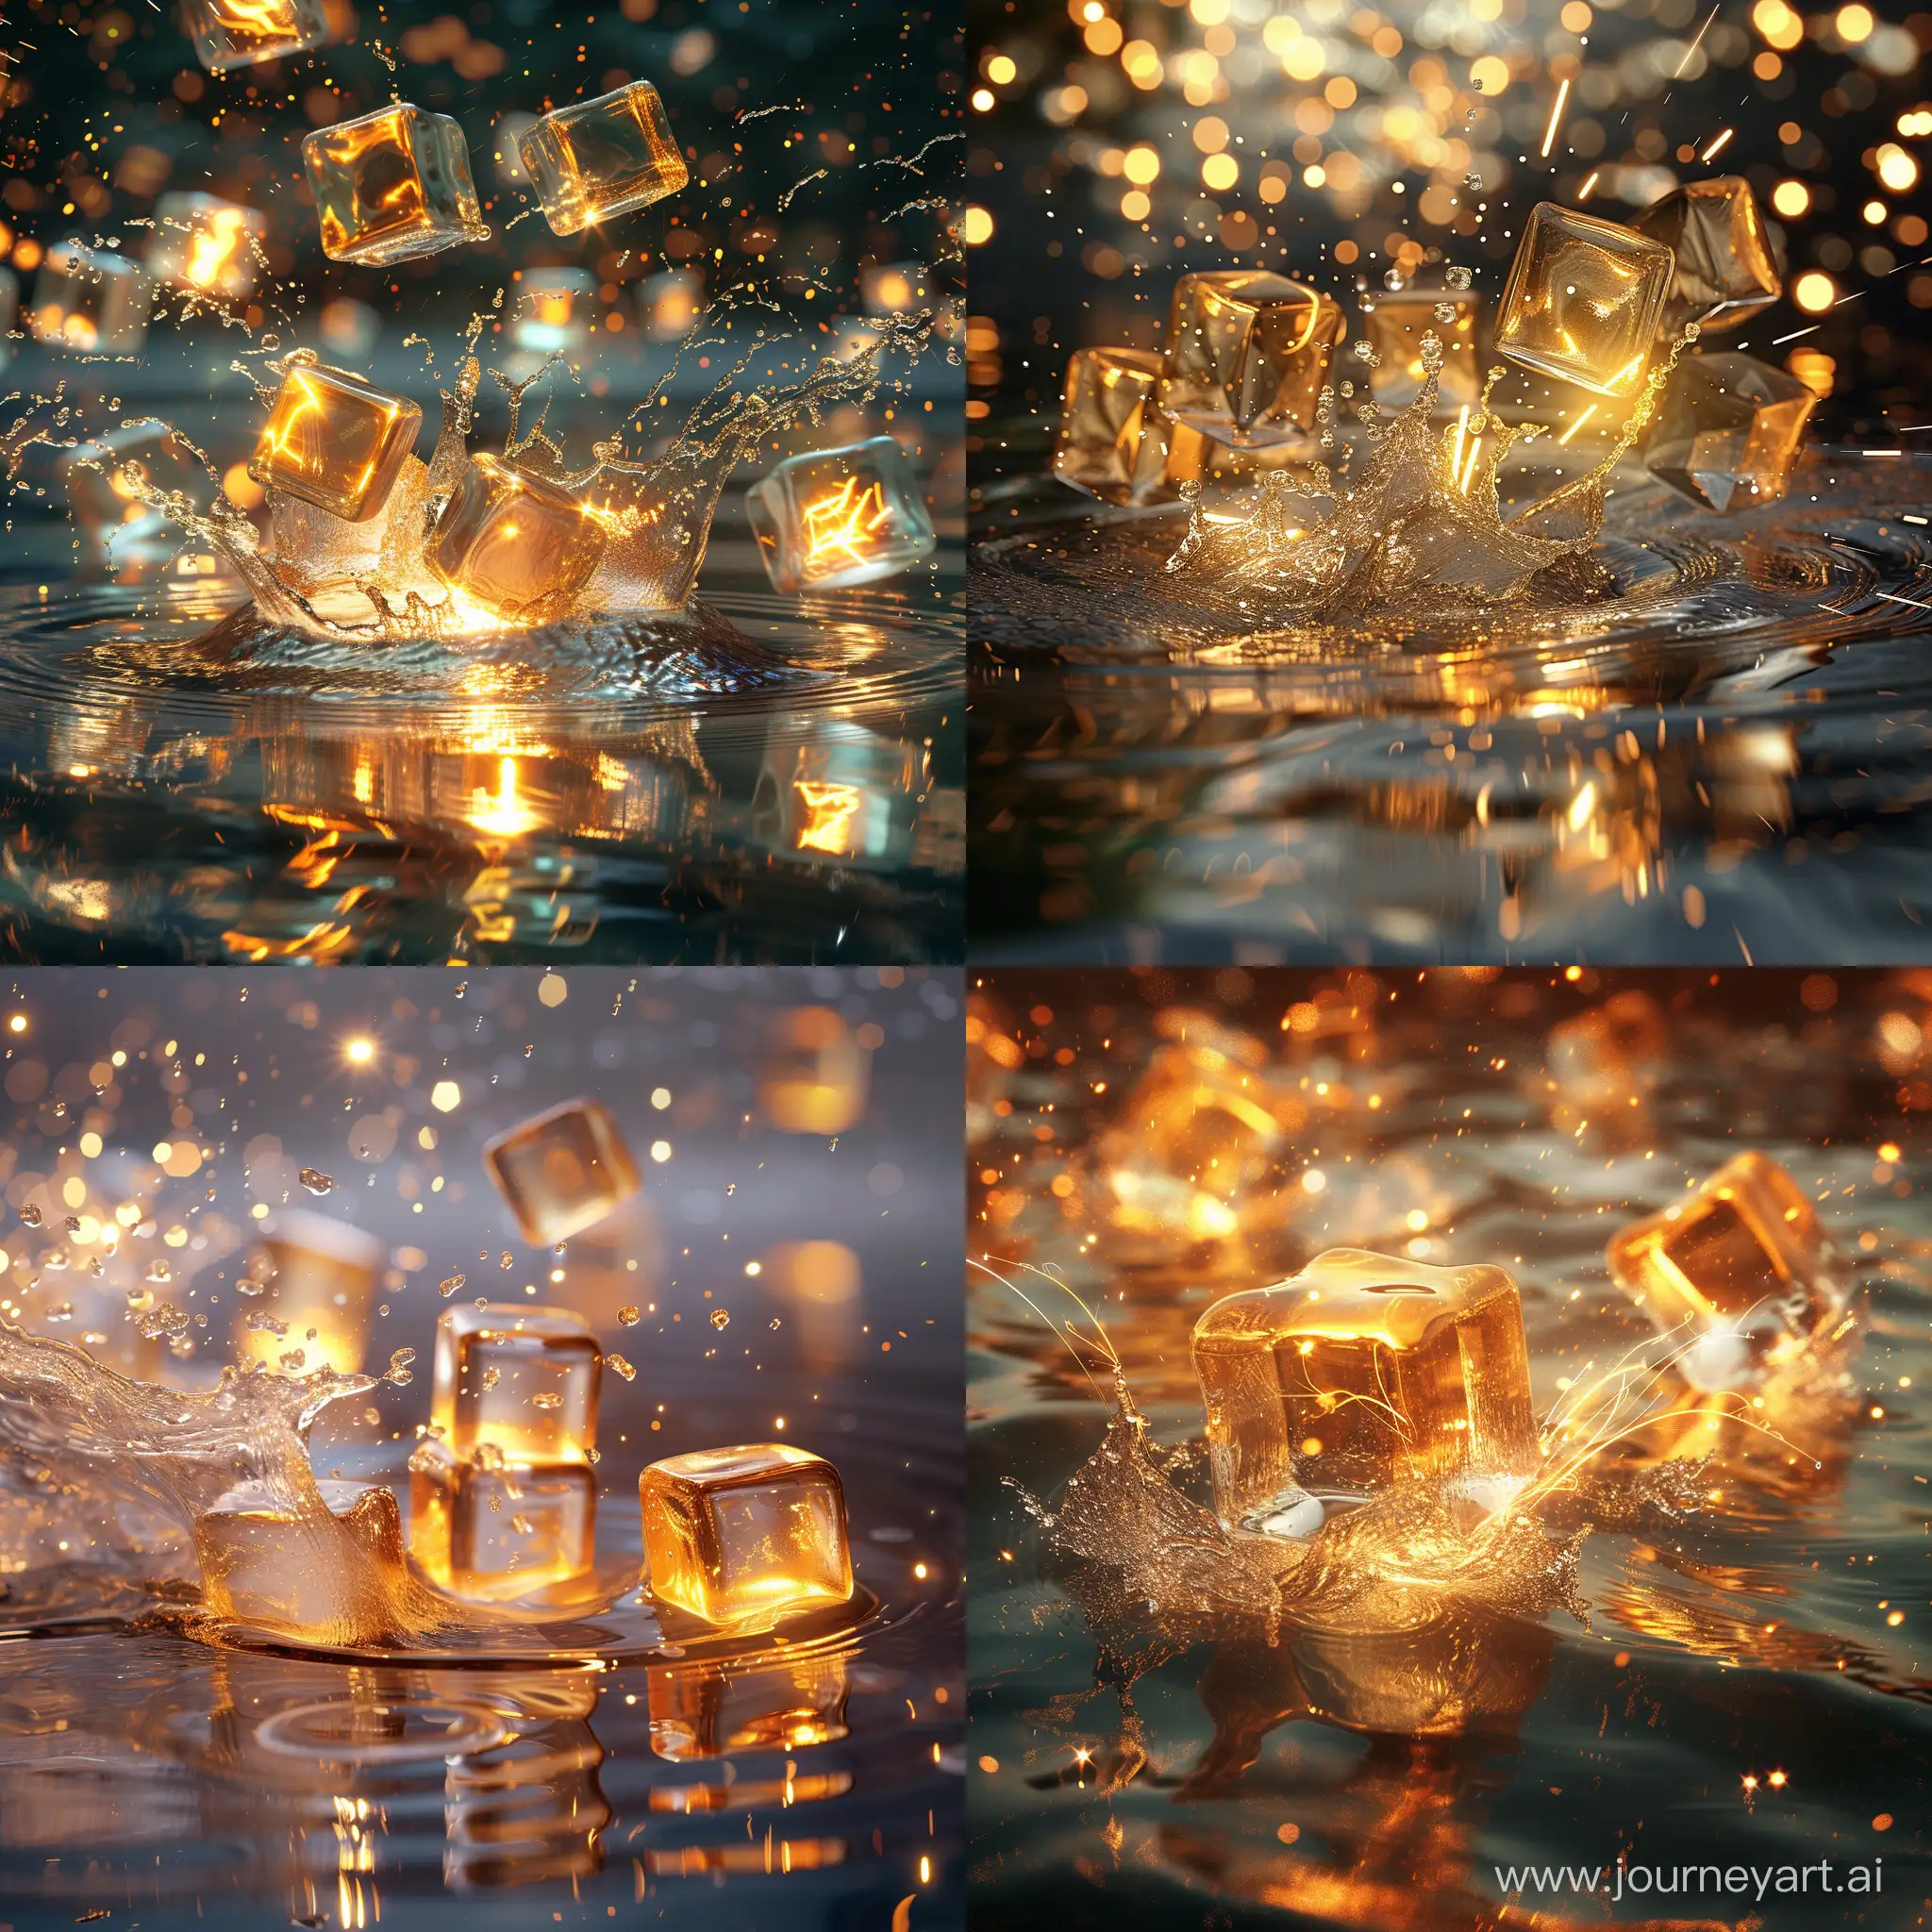 glowing and reflective ice cubes golden color palate dropped on a dynamic reflective water surface creating water currents and sparks
   